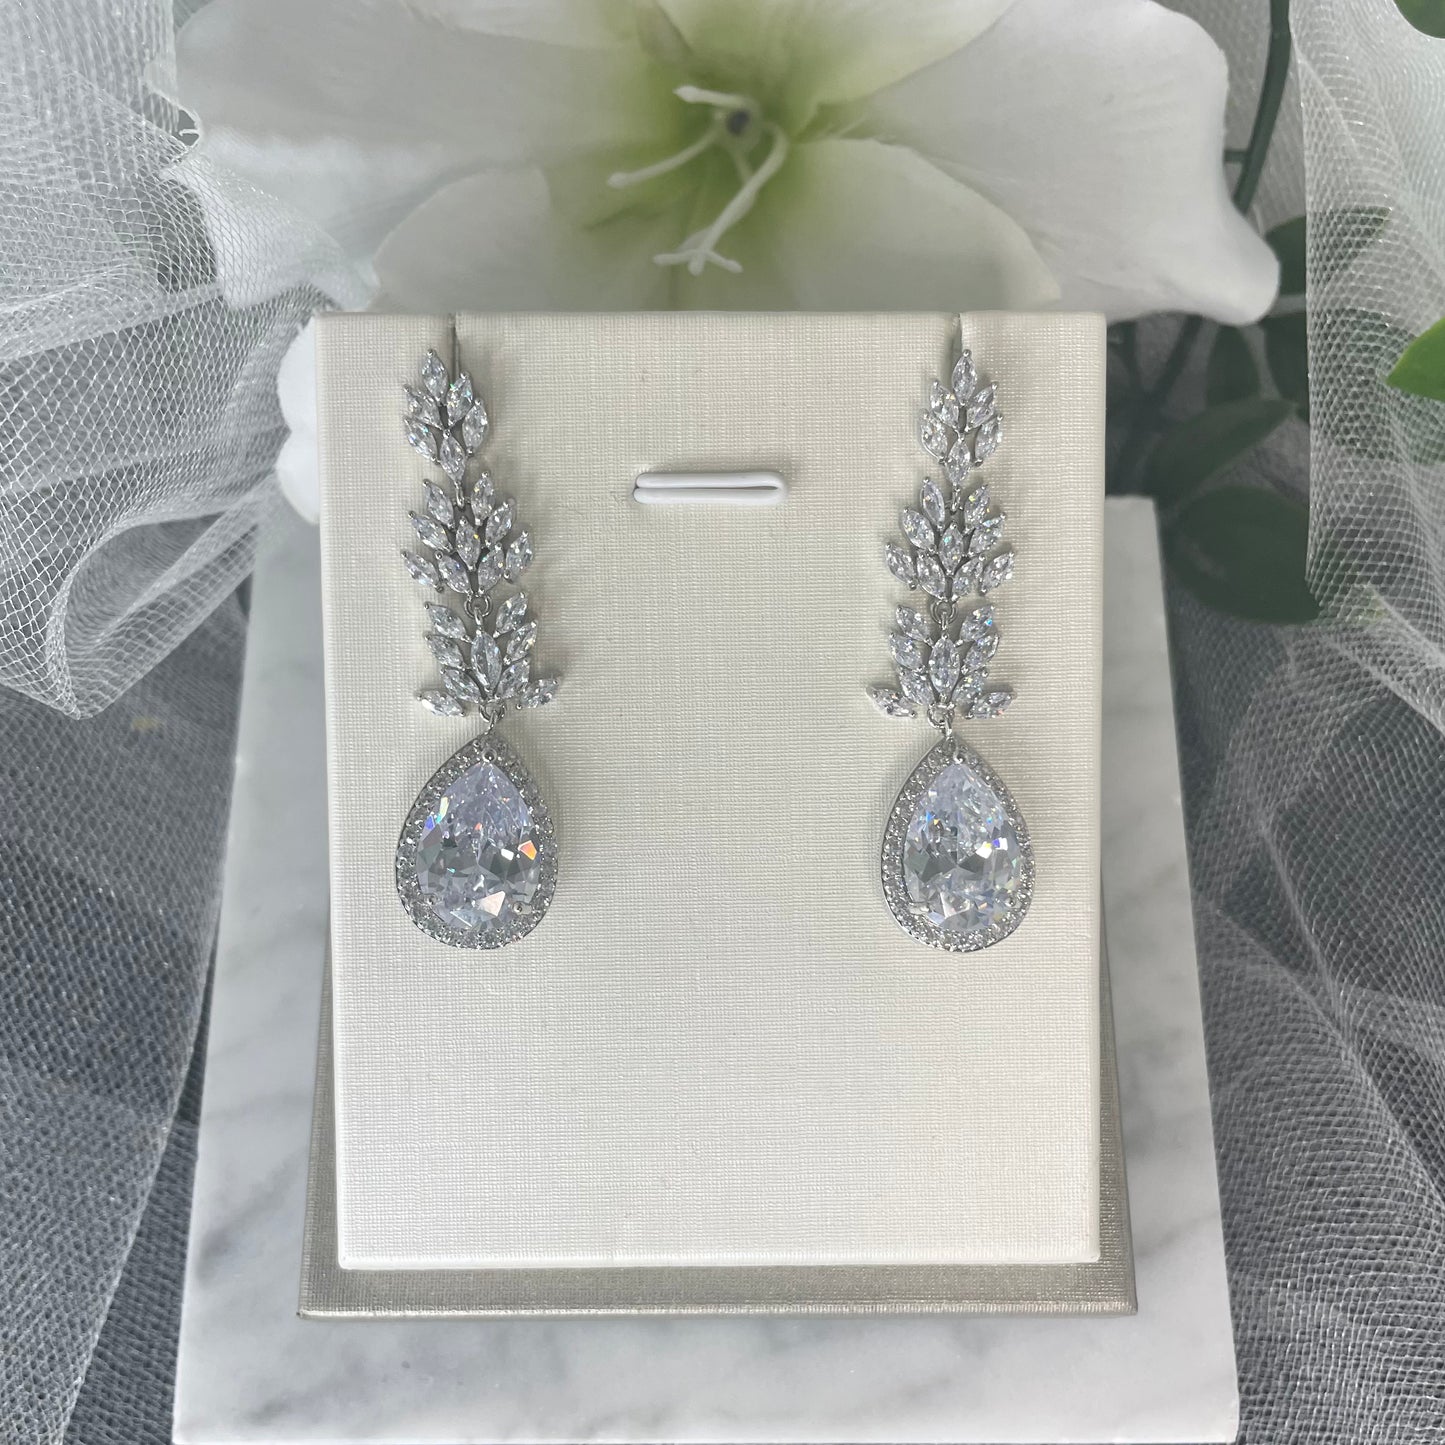 Madonna leaf-design crystal earrings with teardrop centrepiece and diamanté cubic zirconia accents.